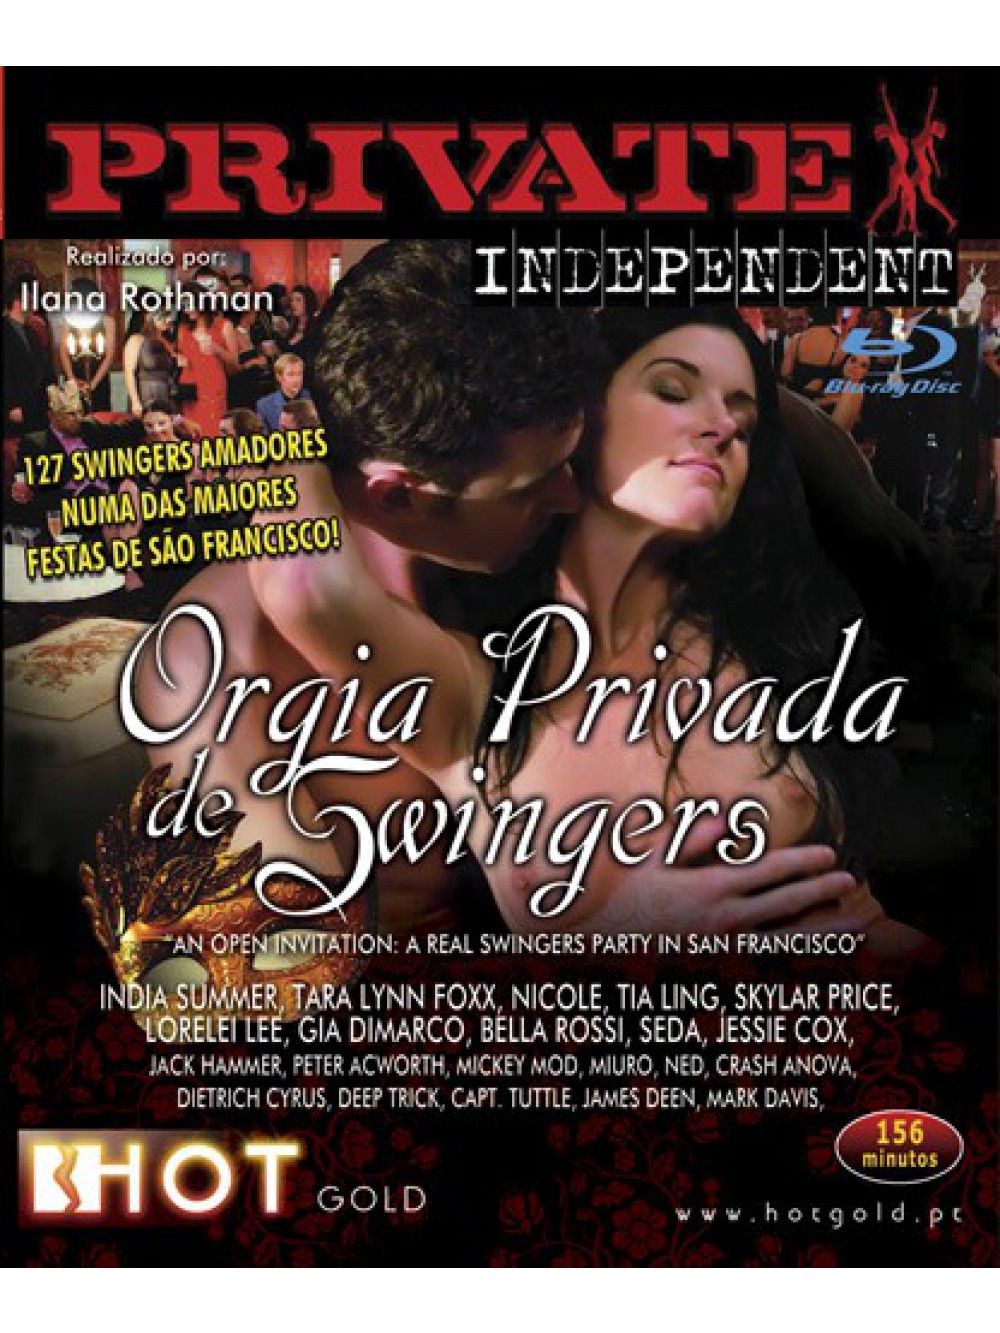 AN OPEN INVITATION A REAL SWINGERS PARTY IN SAN FRANCISCO BLU-RAY - DVD and Books